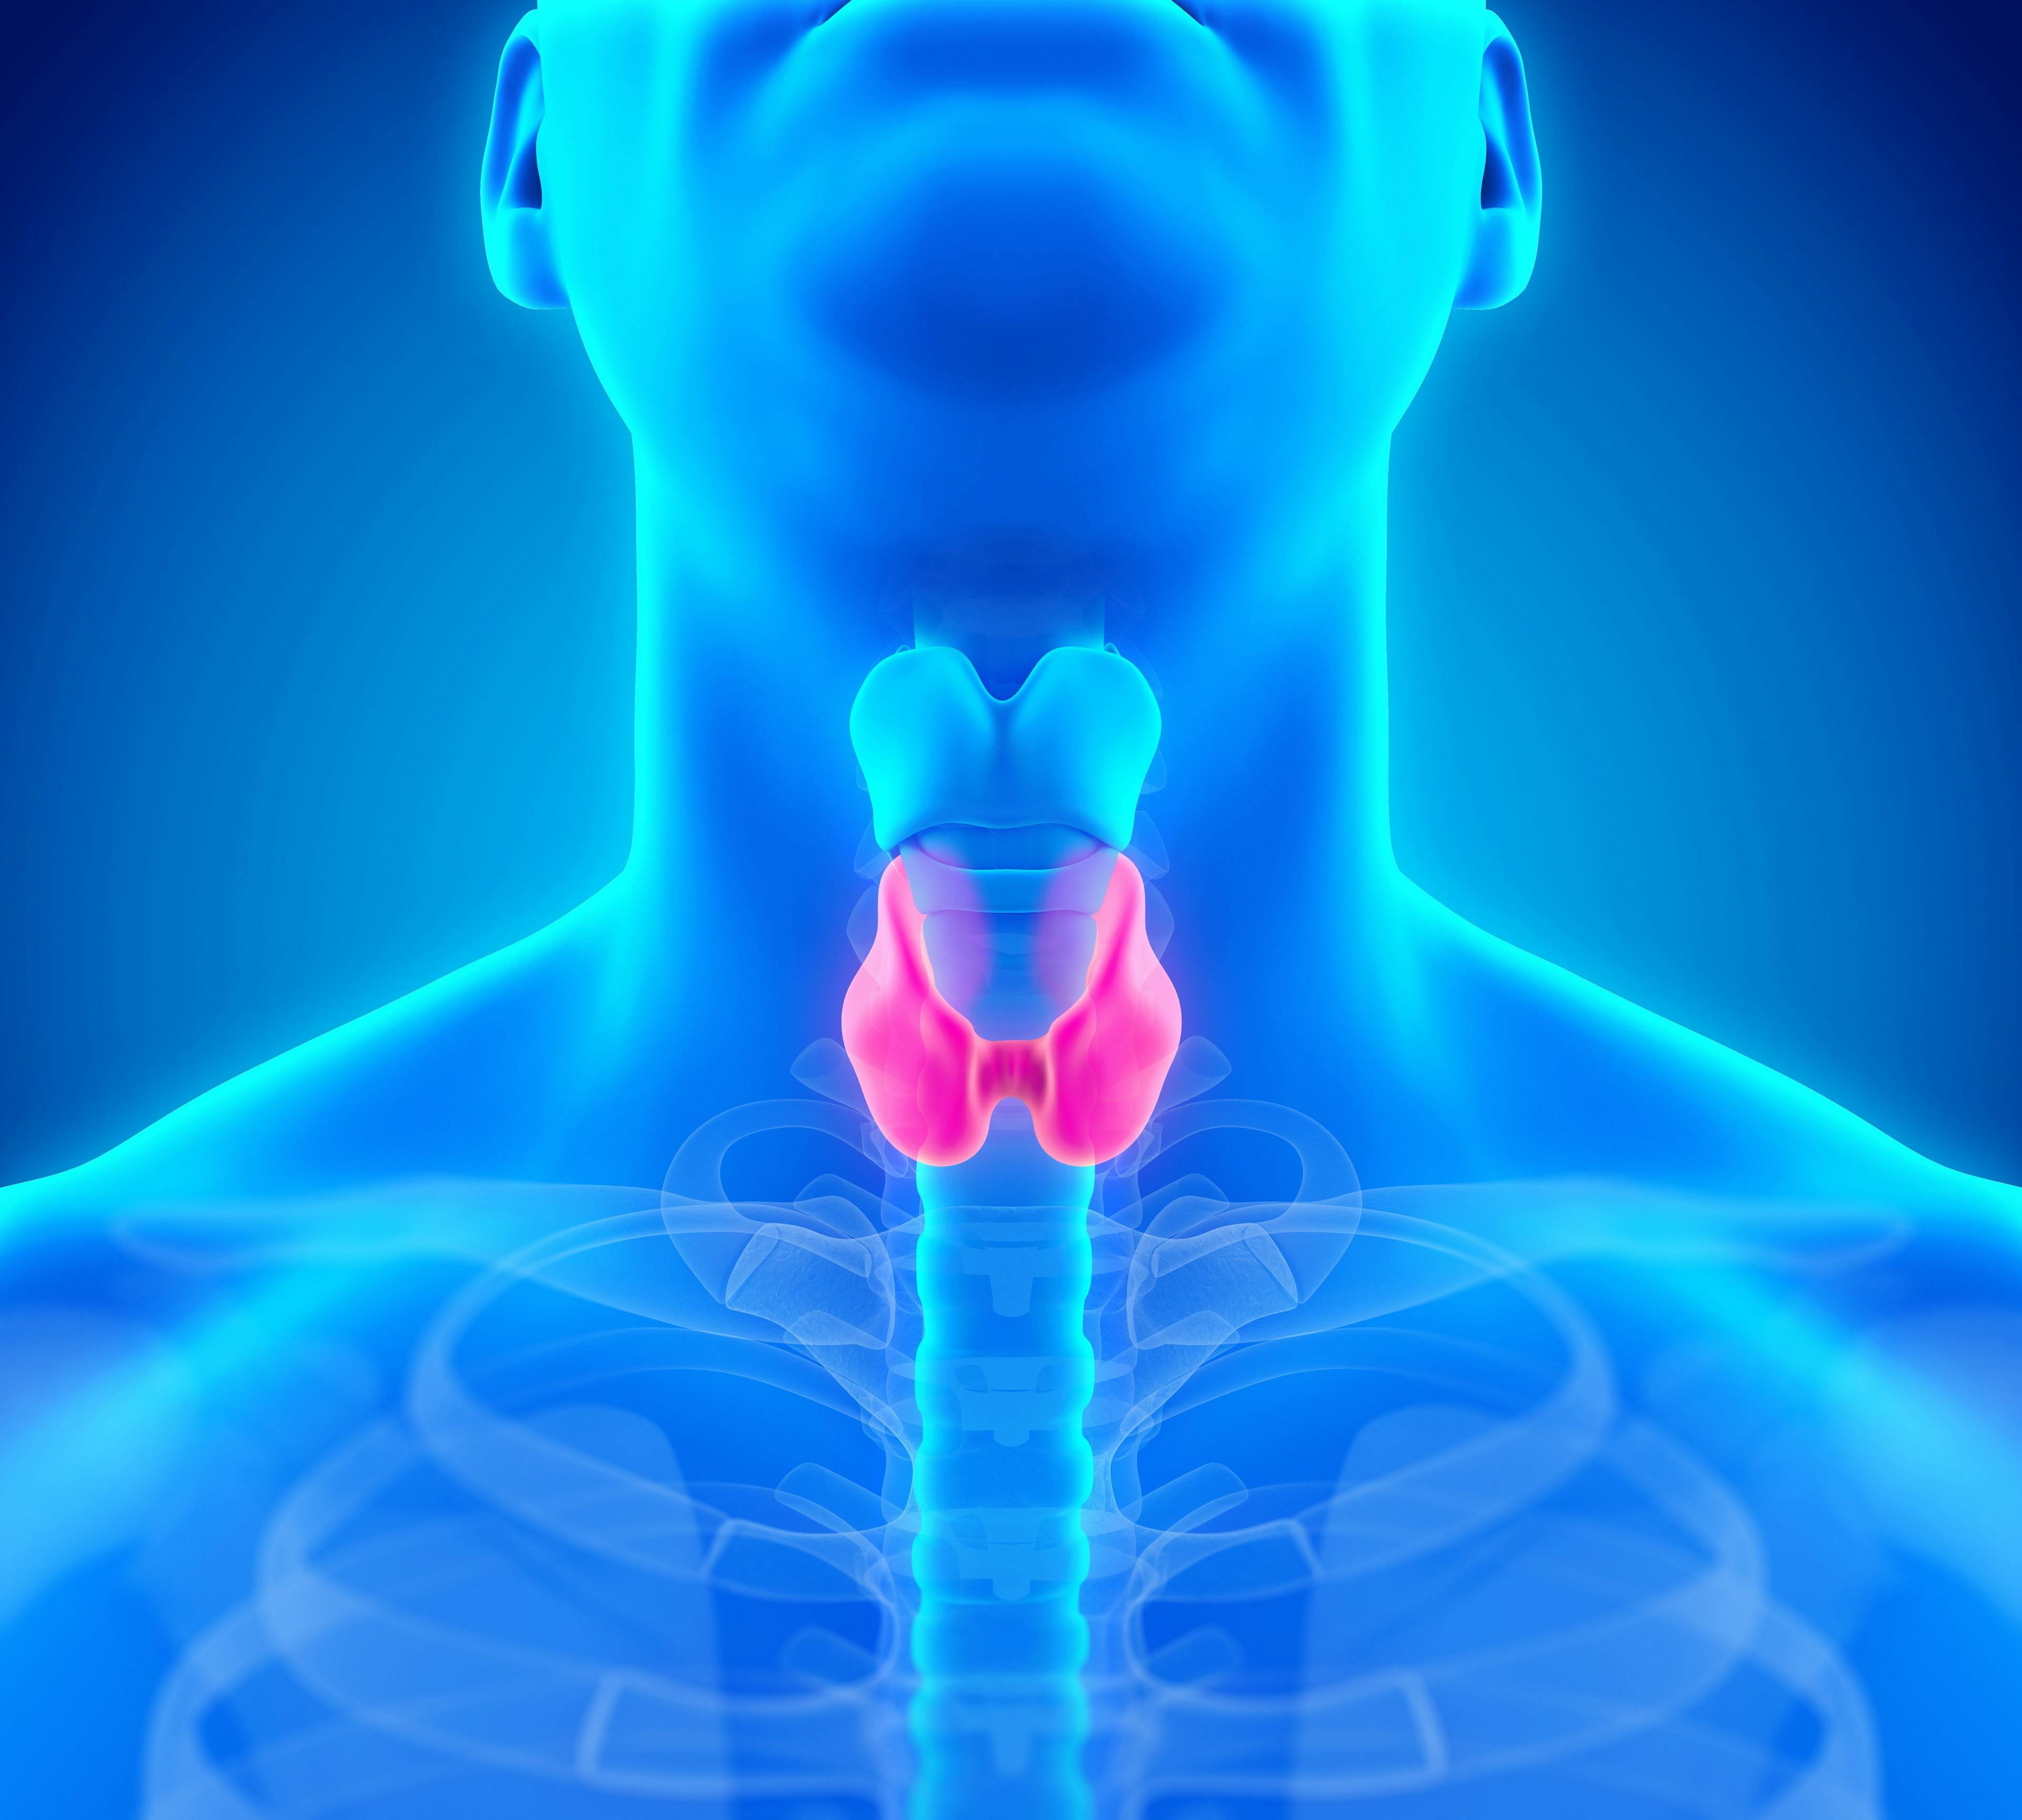 Study Reports First Known Case of Subacute Thyroiditis After COVID-19 Infection